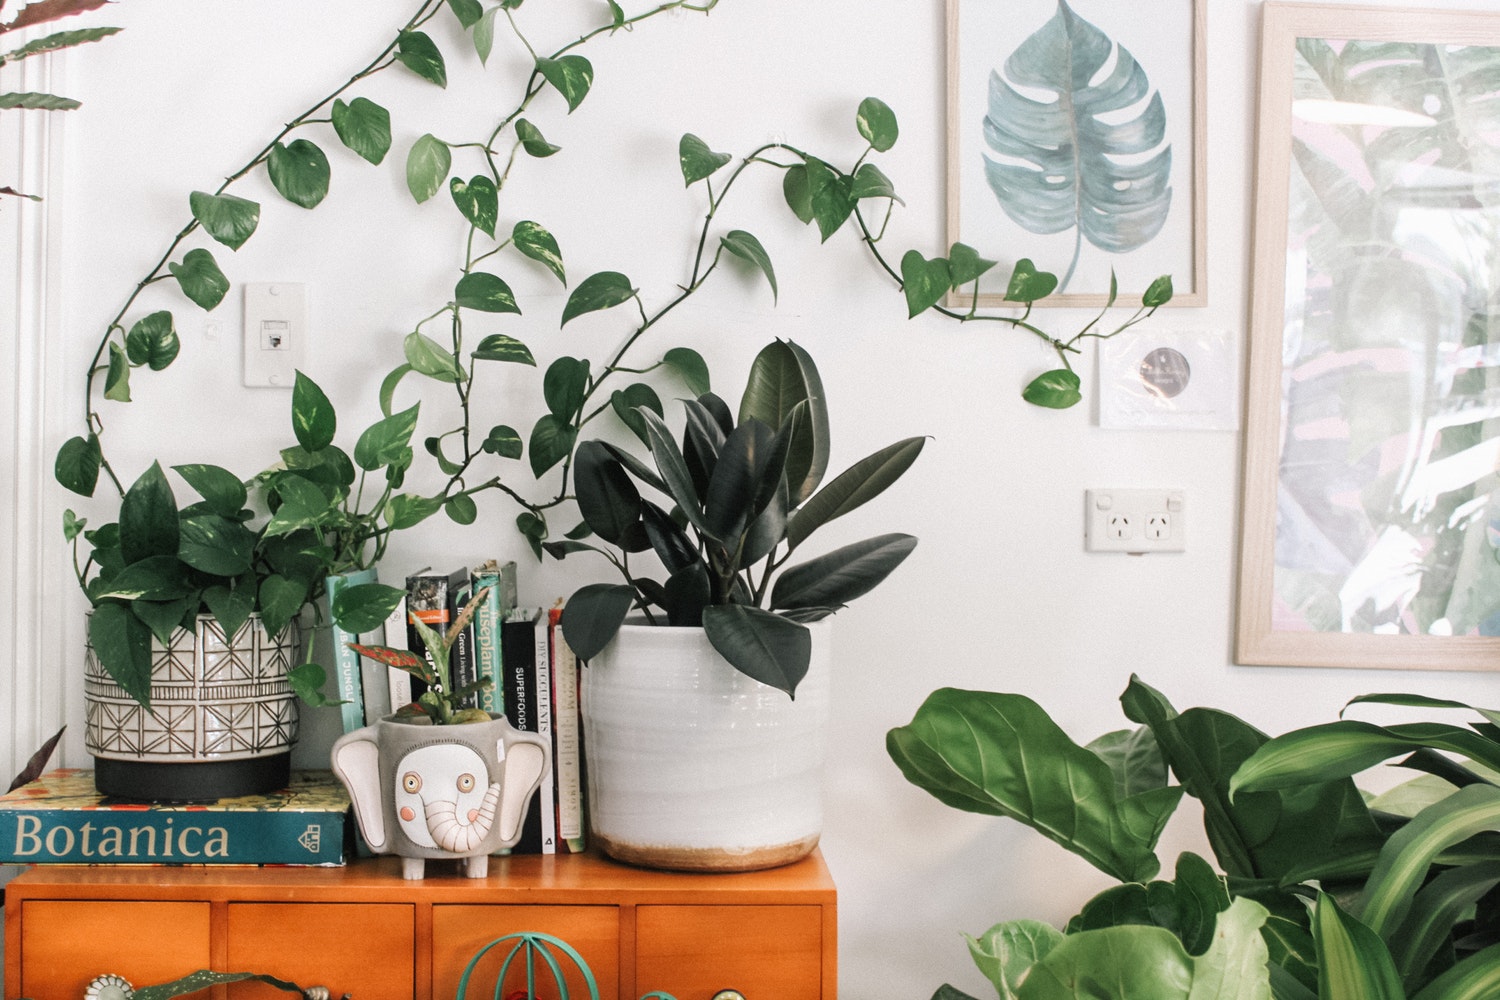 pothos, rubber tree plant and a fiddle leaf fig on an orange table with plant art surrounding them